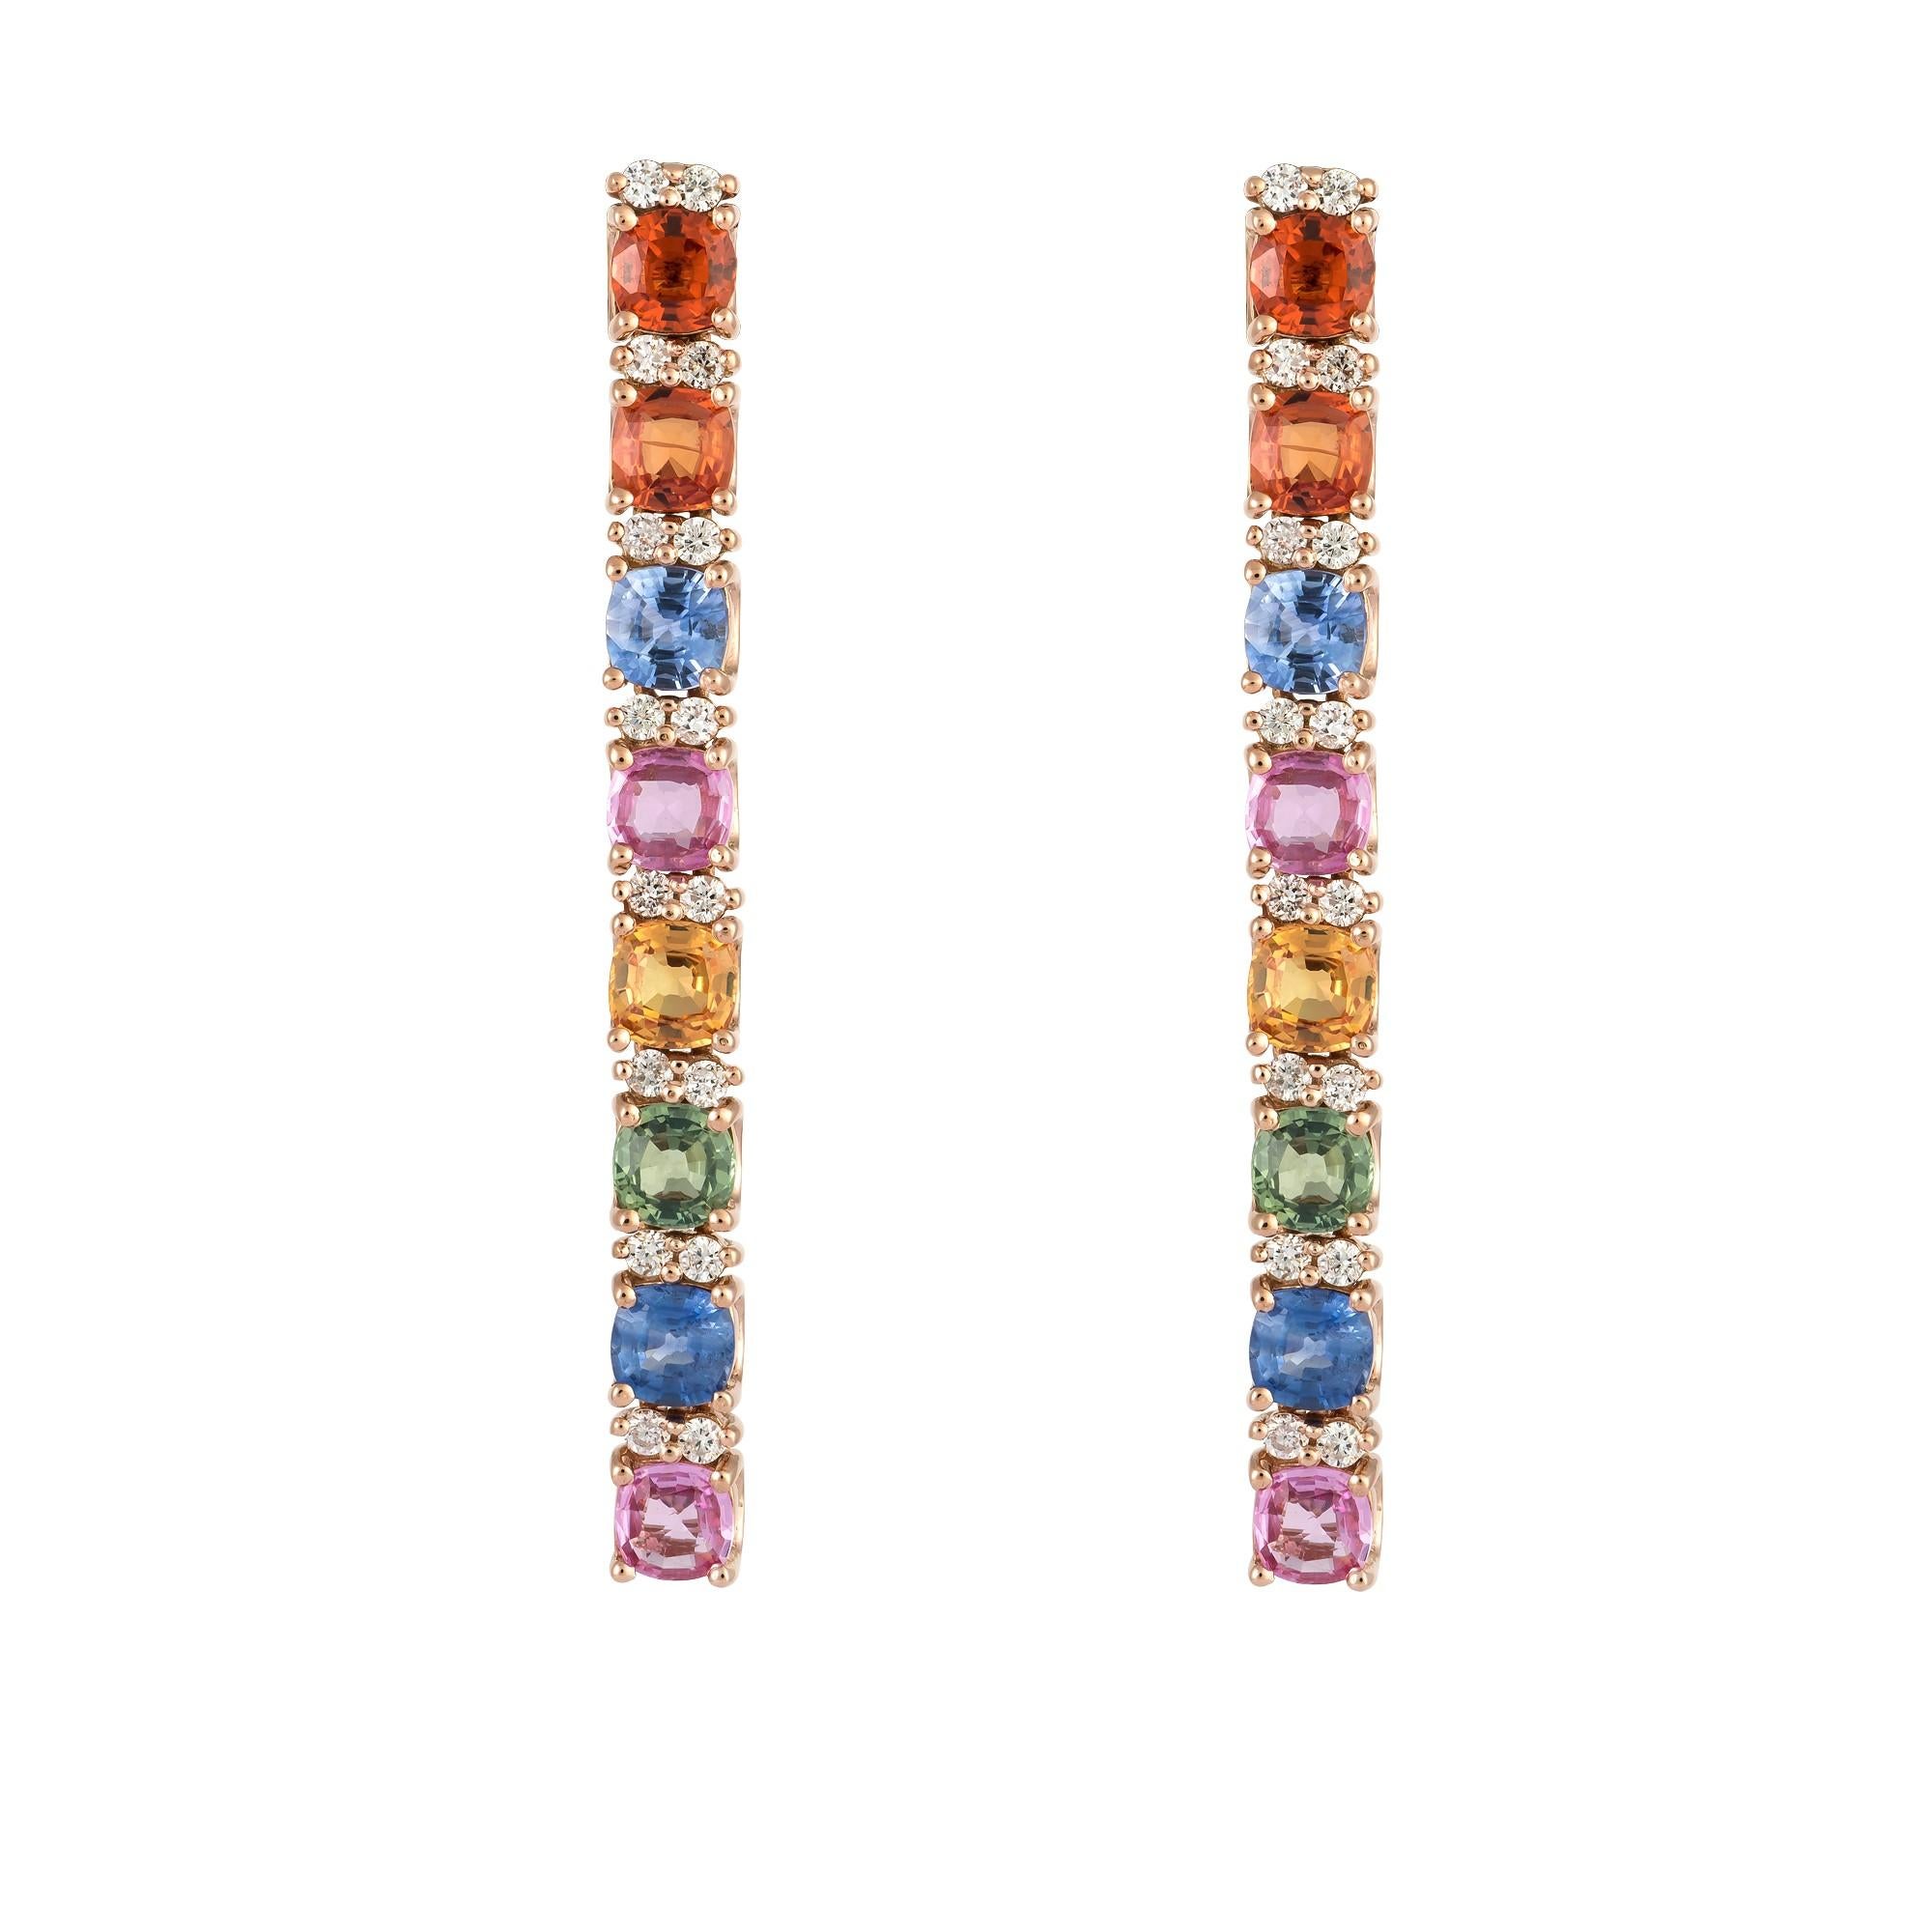 The Following Items we are offering is a Rare Important Radiant Pair of 18KT Gold Large Glistening Magnificent Large Fancy Multi Colored Rainbow Sapphire Diamond Dangle Earrings. Stones are Very Clean and Extremely Fine! Approx T.C.W. 6CTS!!! 
These